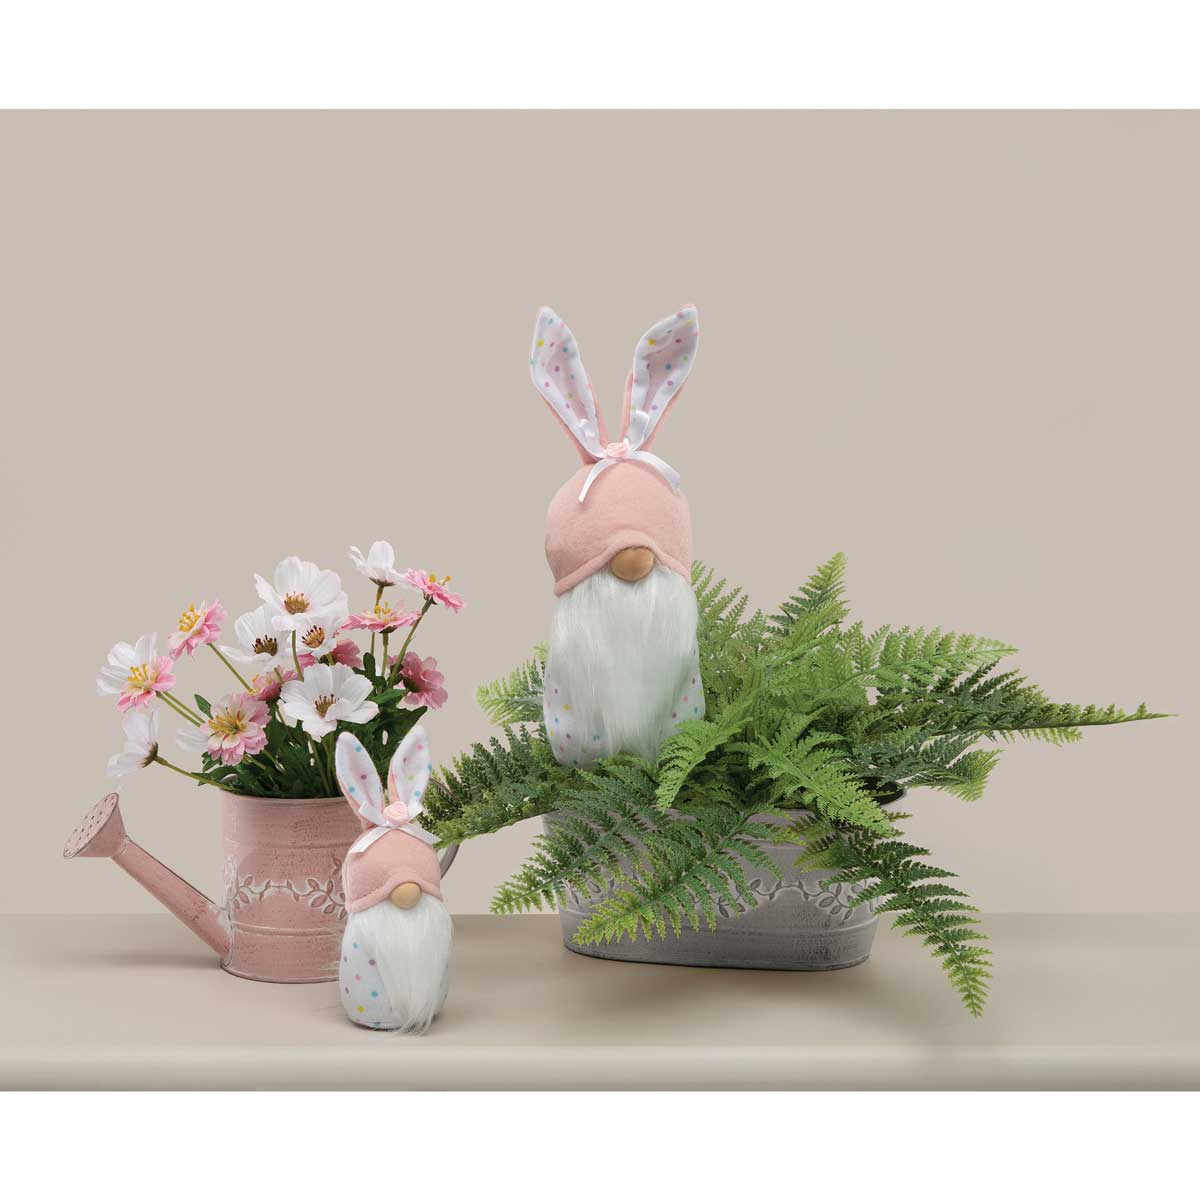 b70 GNOME PINDOT BUNNY SMALL 2.5IN X 4IN X 6.5IN WHITE/PINK - Click Image to Close